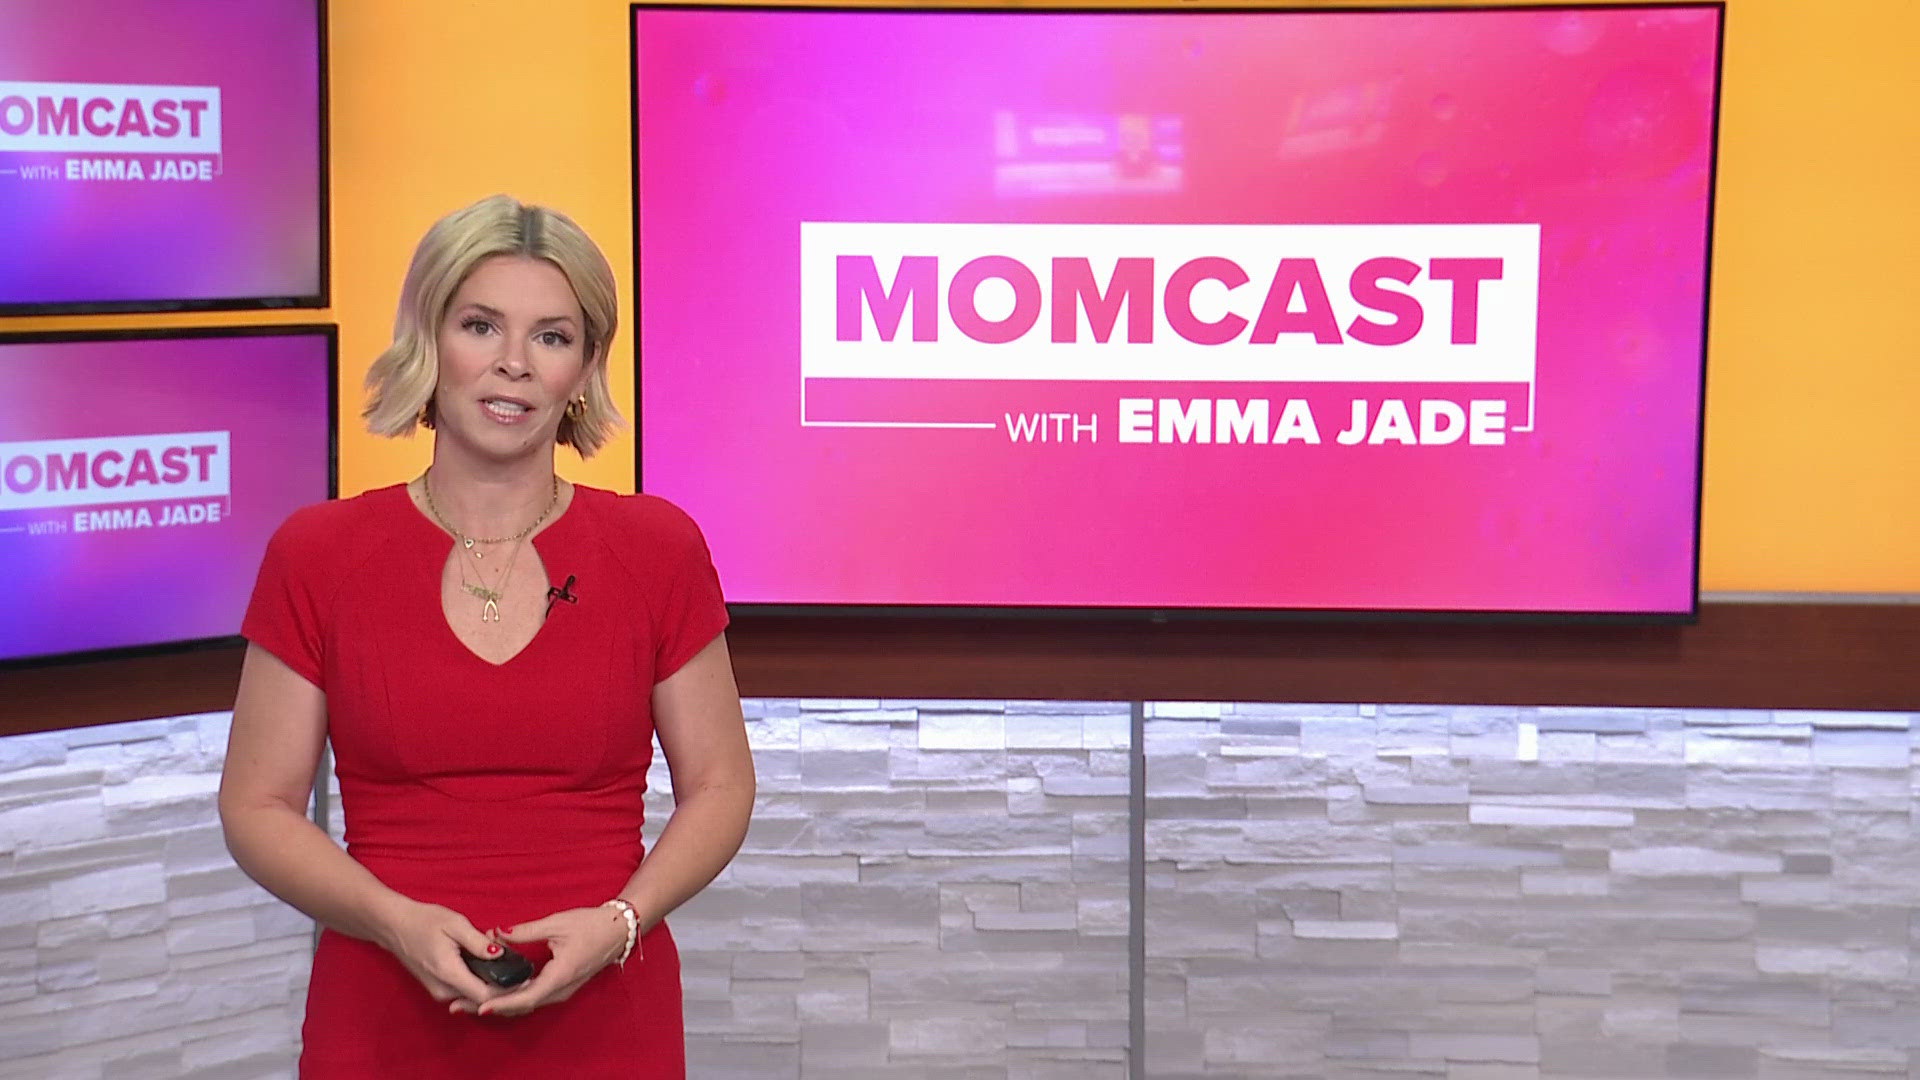 Emma Jade recently went in for a mammogram and shared her experience on the latest episode of MOMCAST.